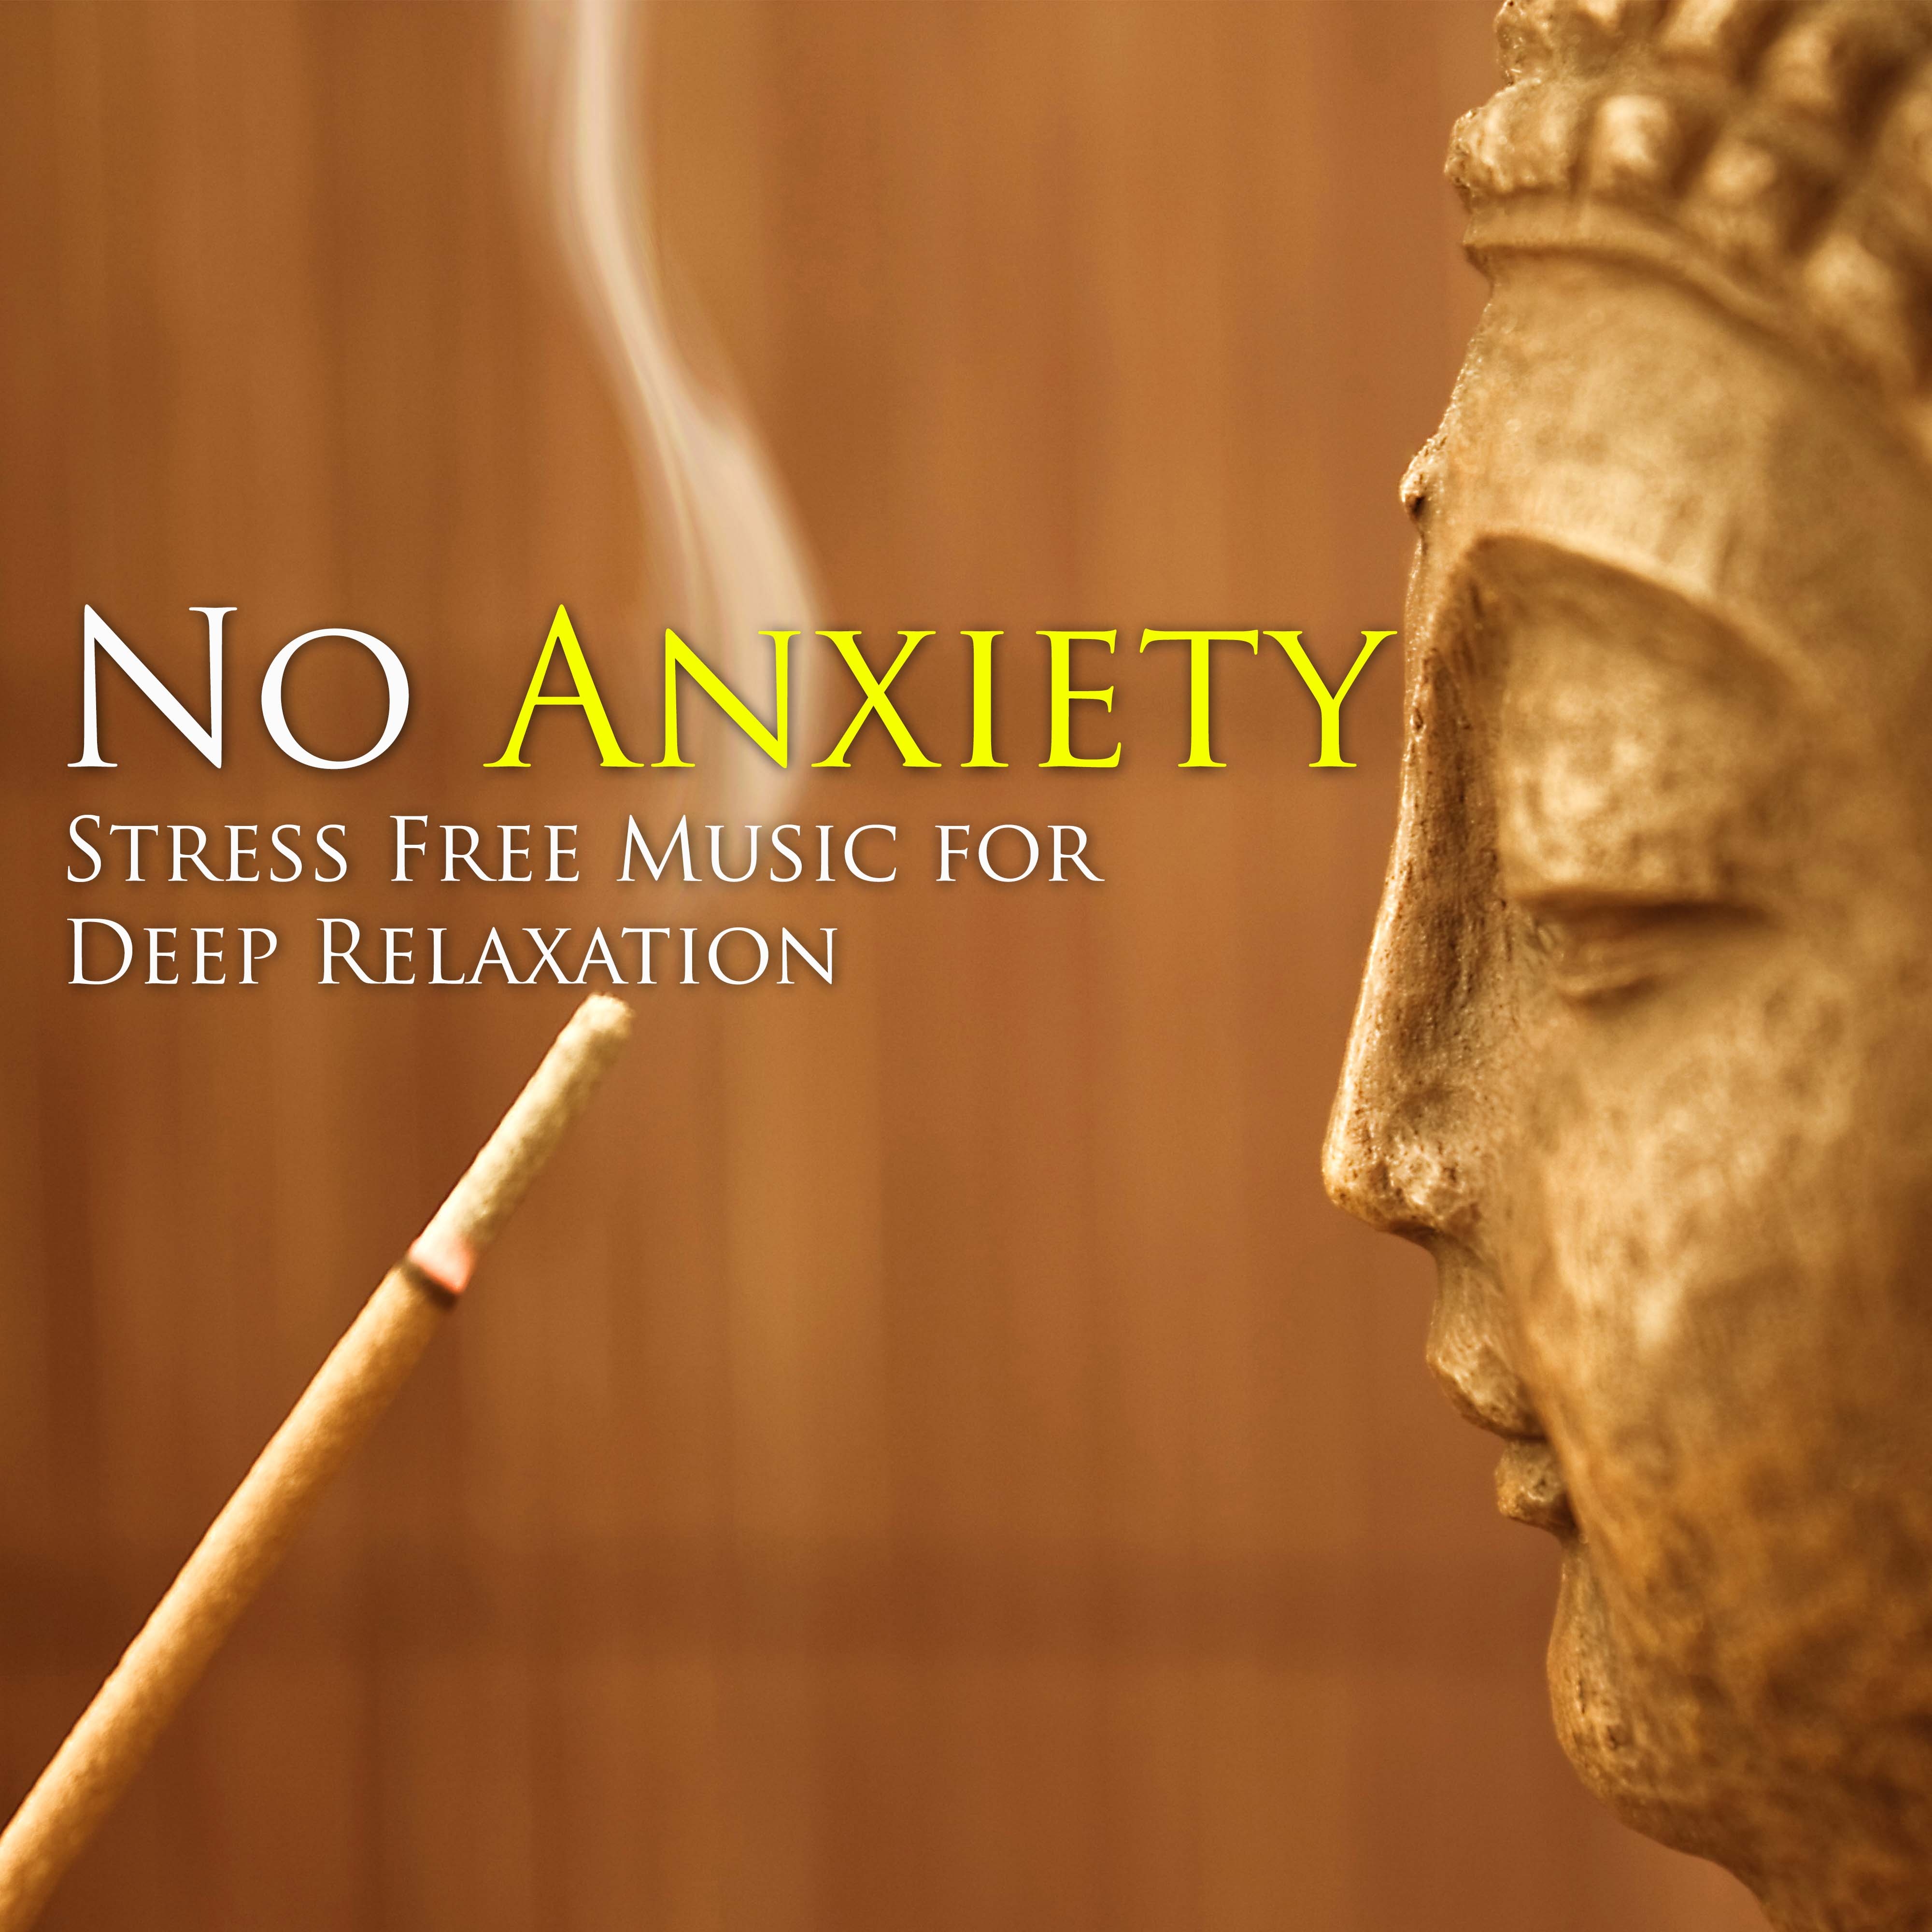 No Anxiety - Stress Free Music for Deep Relaxation